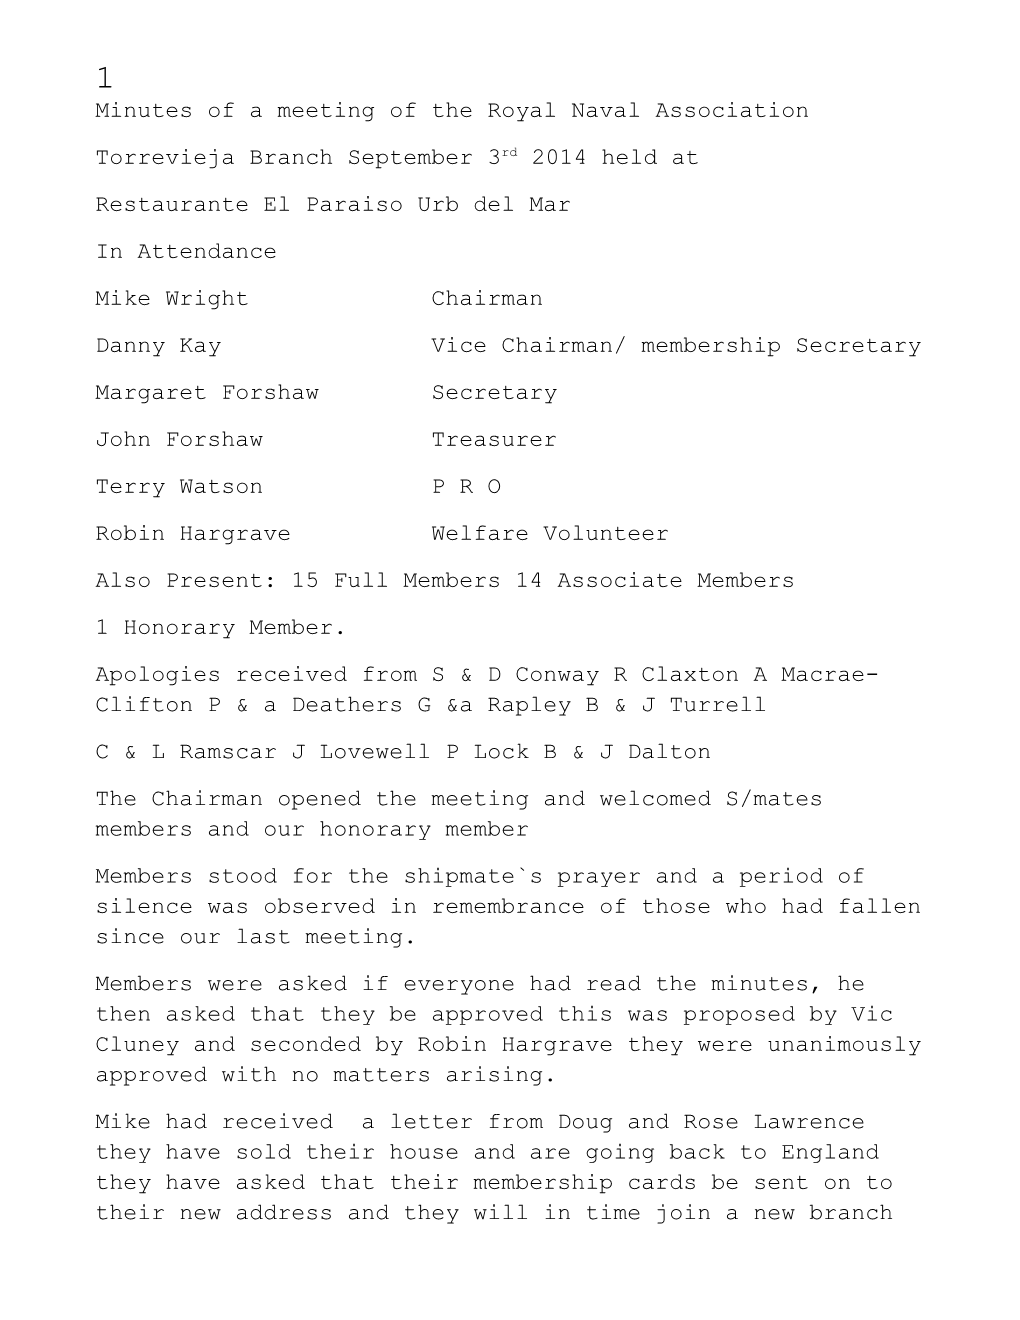 Minutes of a Meeting of the Royal Naval Association